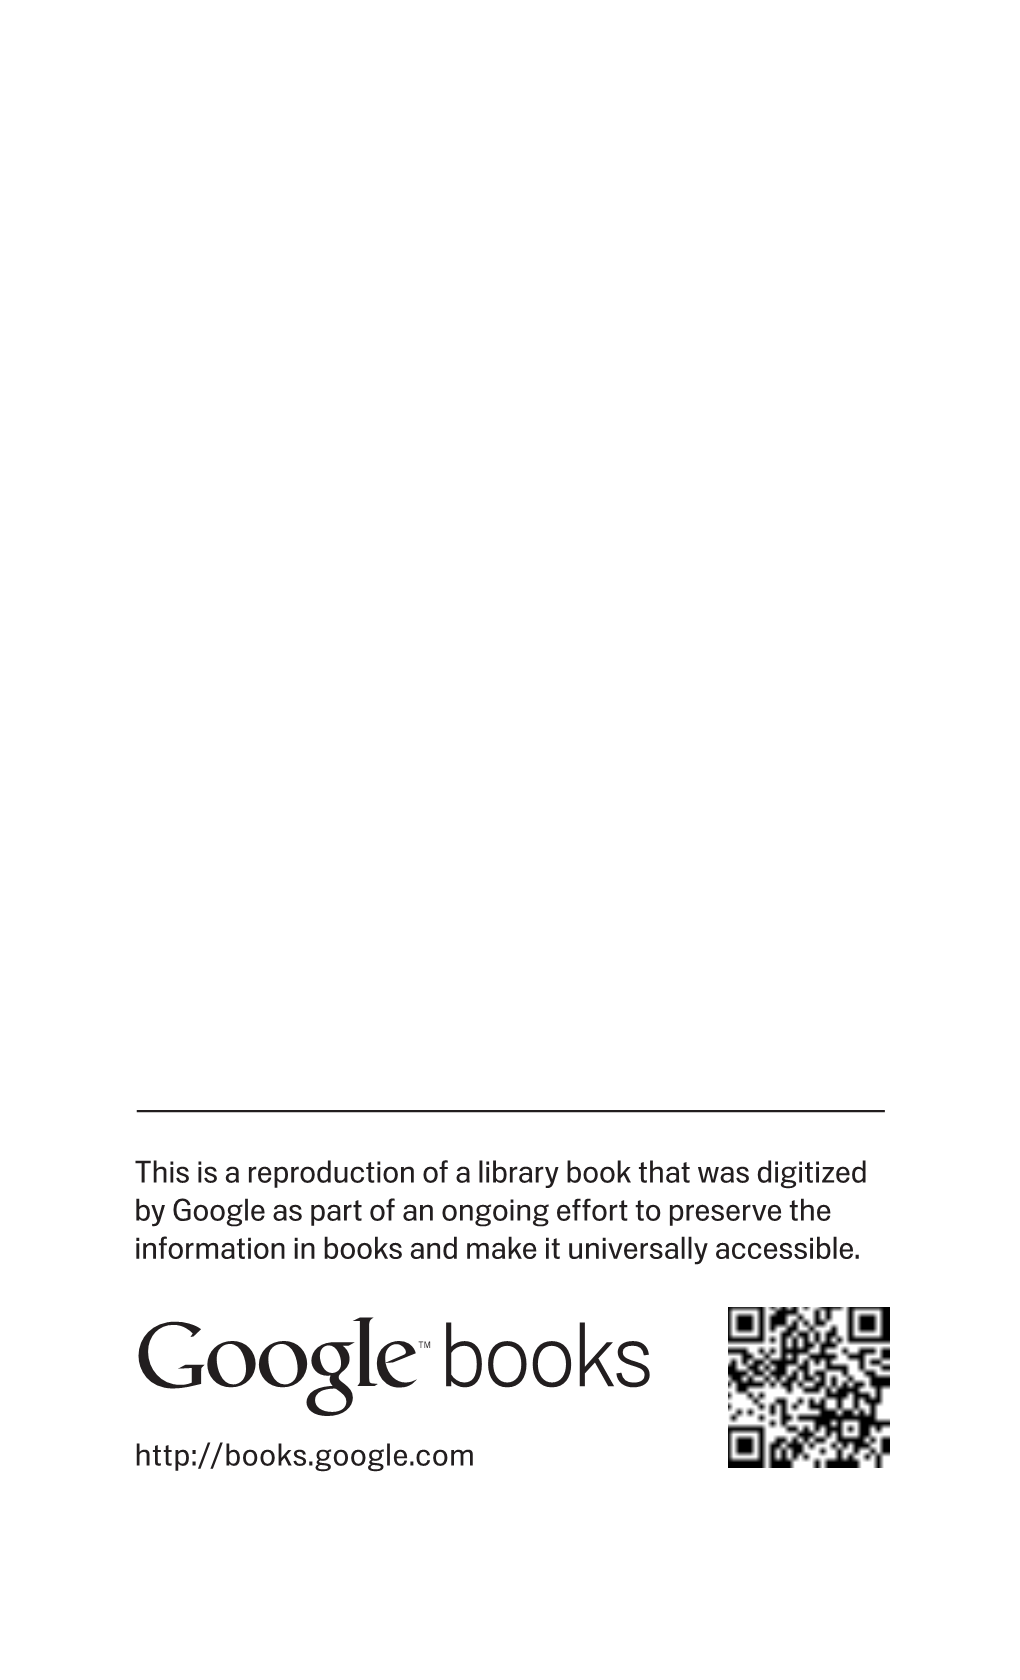 This Is a Reproduction of a Library Book That Was Digitized by Google As Part of an Ongoing Effort to Preserve the Information